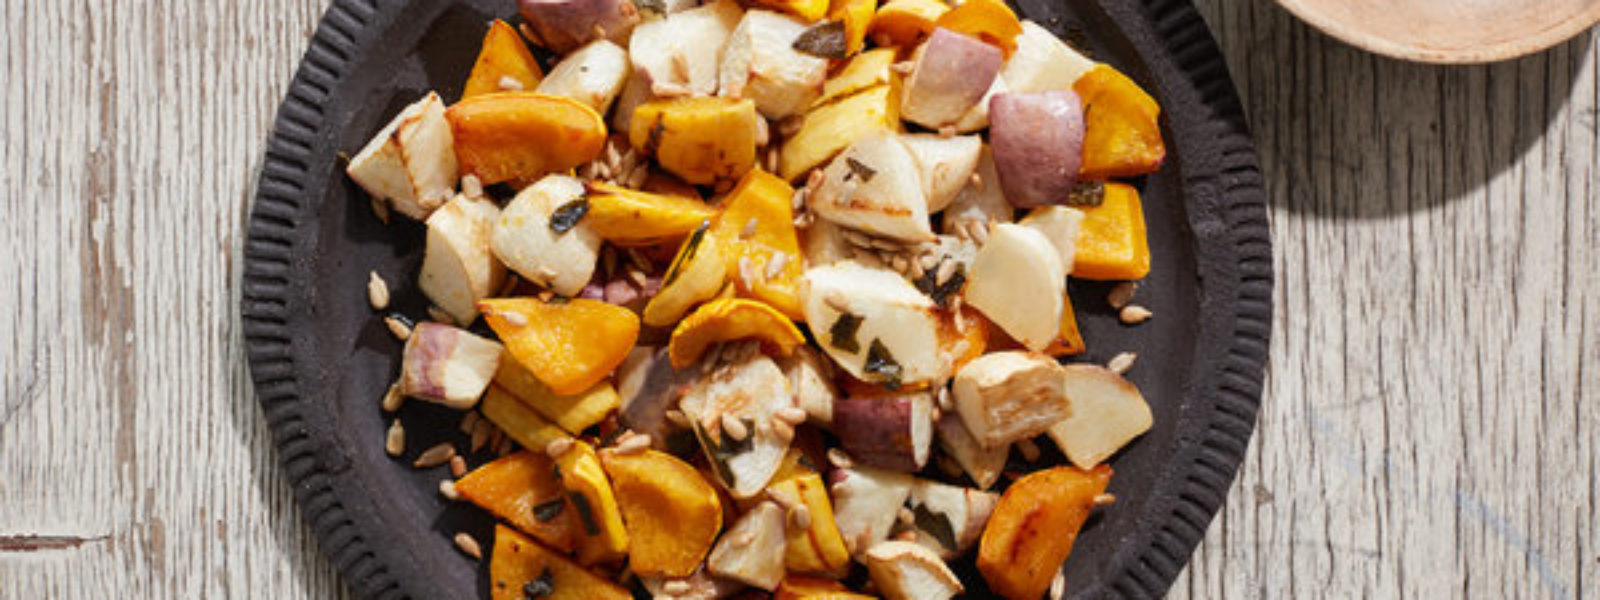 A picture of Roasted Turnips and Winter Squash With Agave Glaze from directly above. The orange and pale root vegetables sit on a slate grey plate with a brown bowl full of a darker brown grain sit in the upper right hand corner of the image.